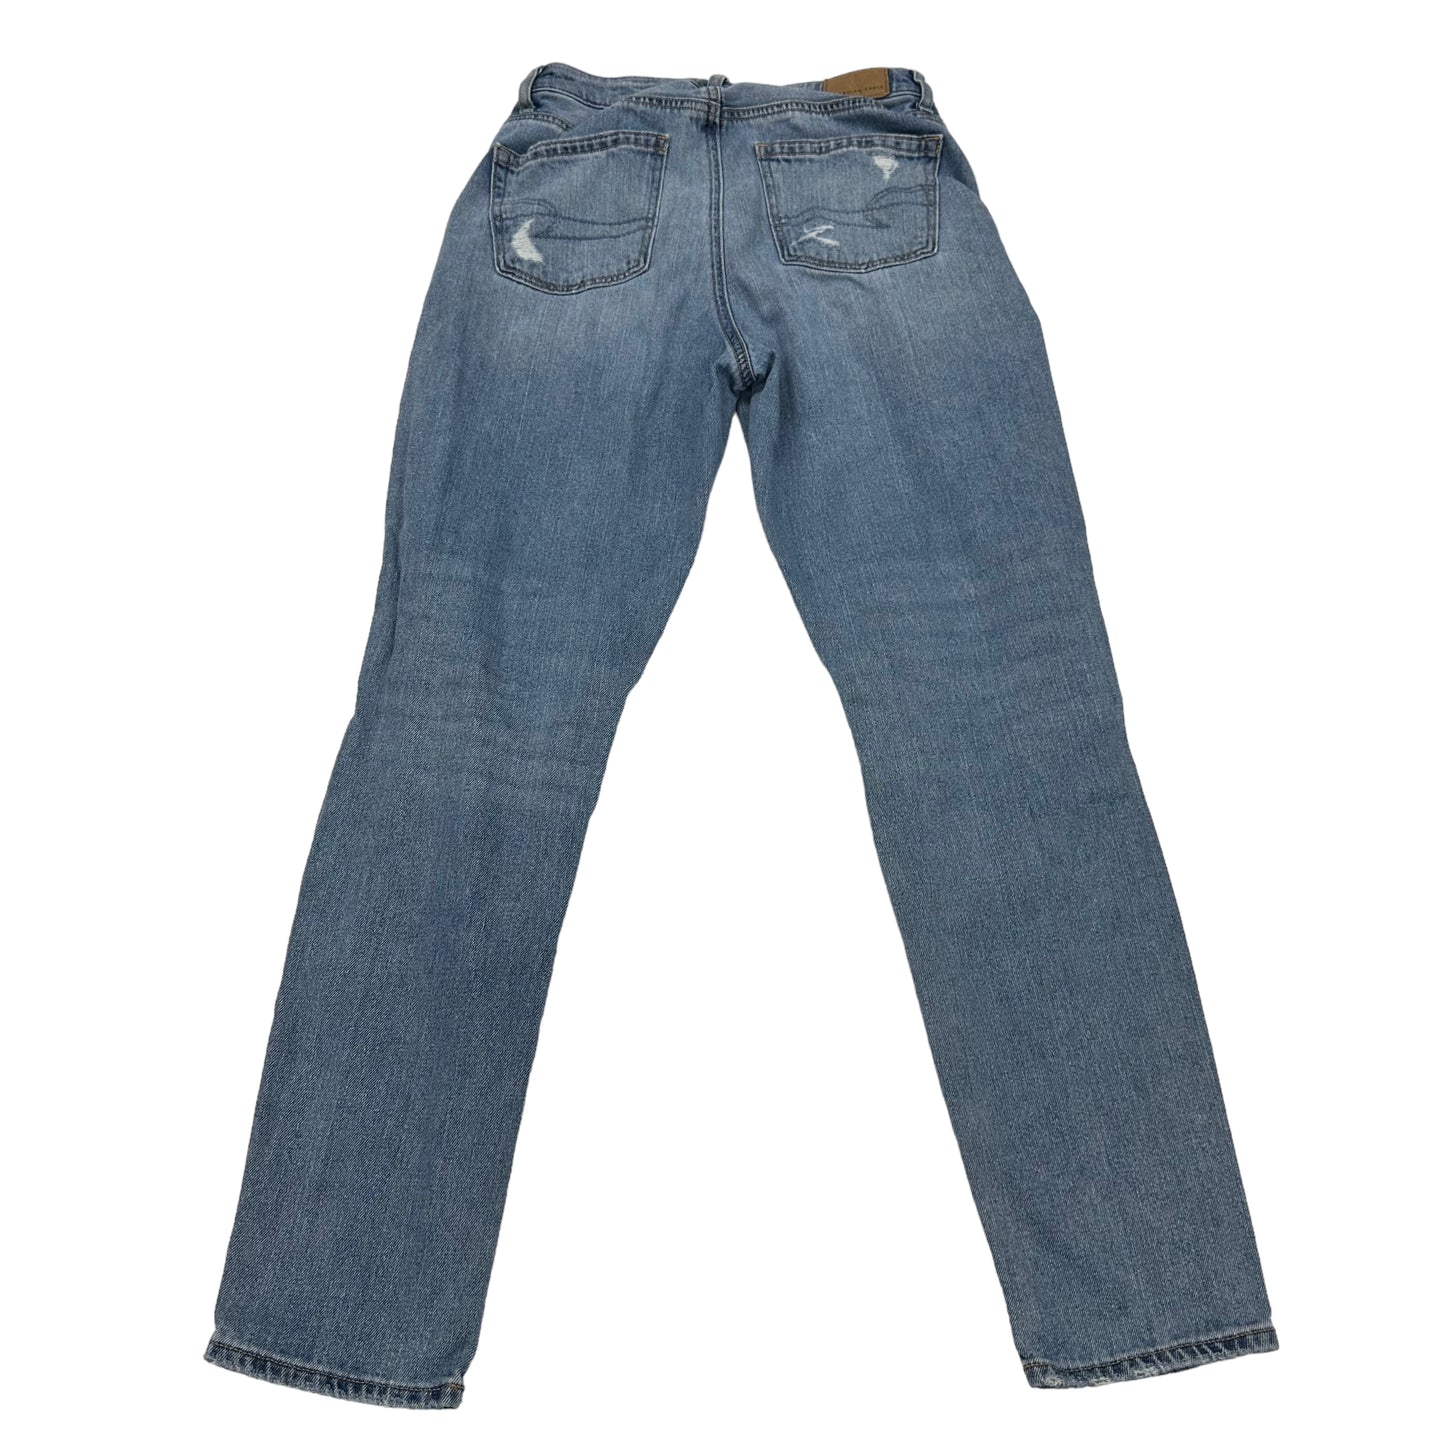 Jeans Relaxed/boyfriend By American Eagle  Size: 0